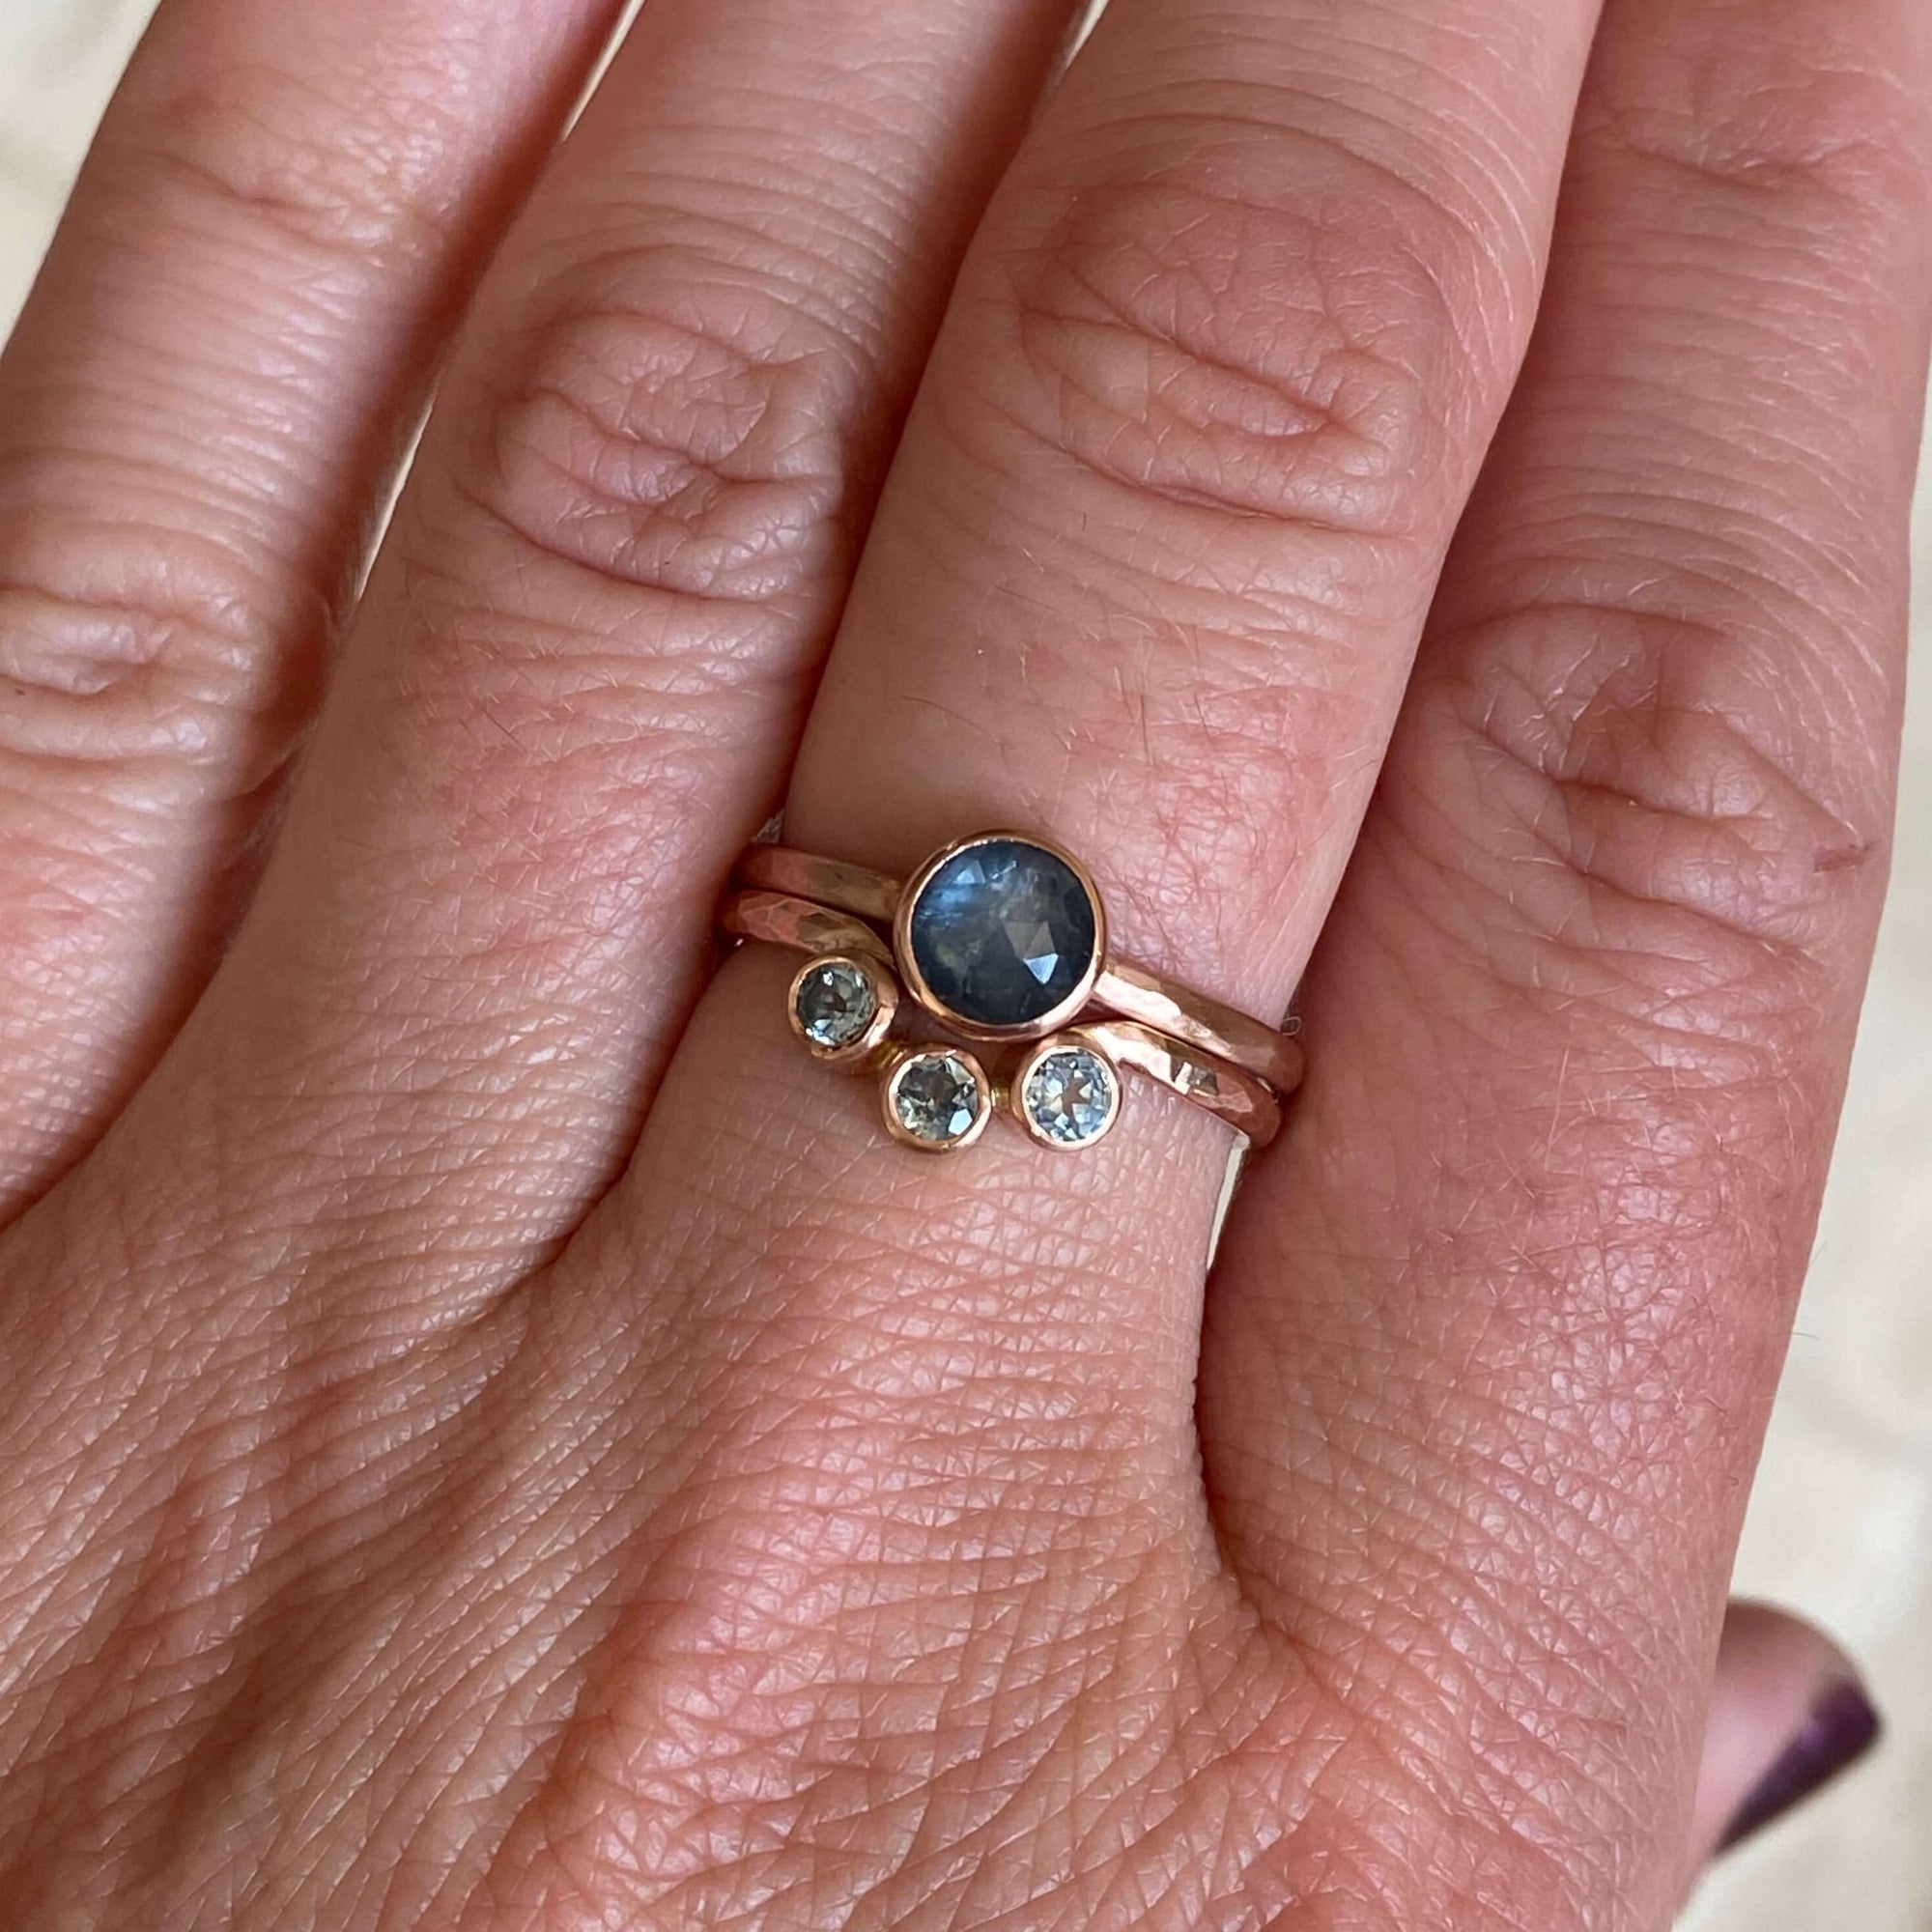 Blue sapphire and rose gold contour band from EC Design Jewelry in Minneapolis, MN. Made with recycled metal and conflict-free stones.